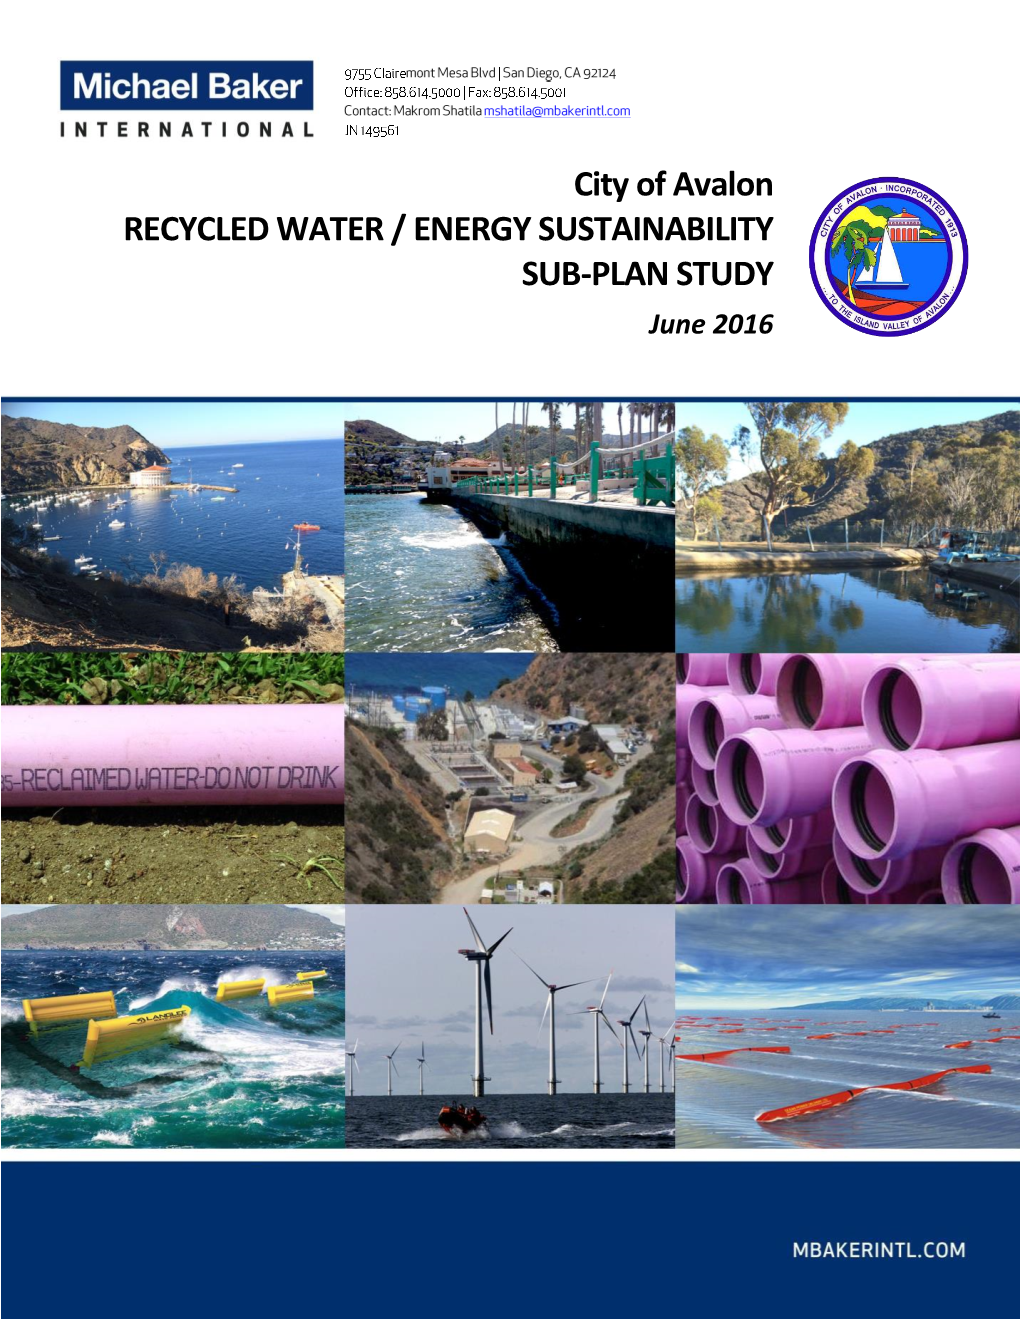 City of Avalon RECYCLED WATER / ENERGY SUSTAINABILITY SUB-PLAN STUDY June 2016